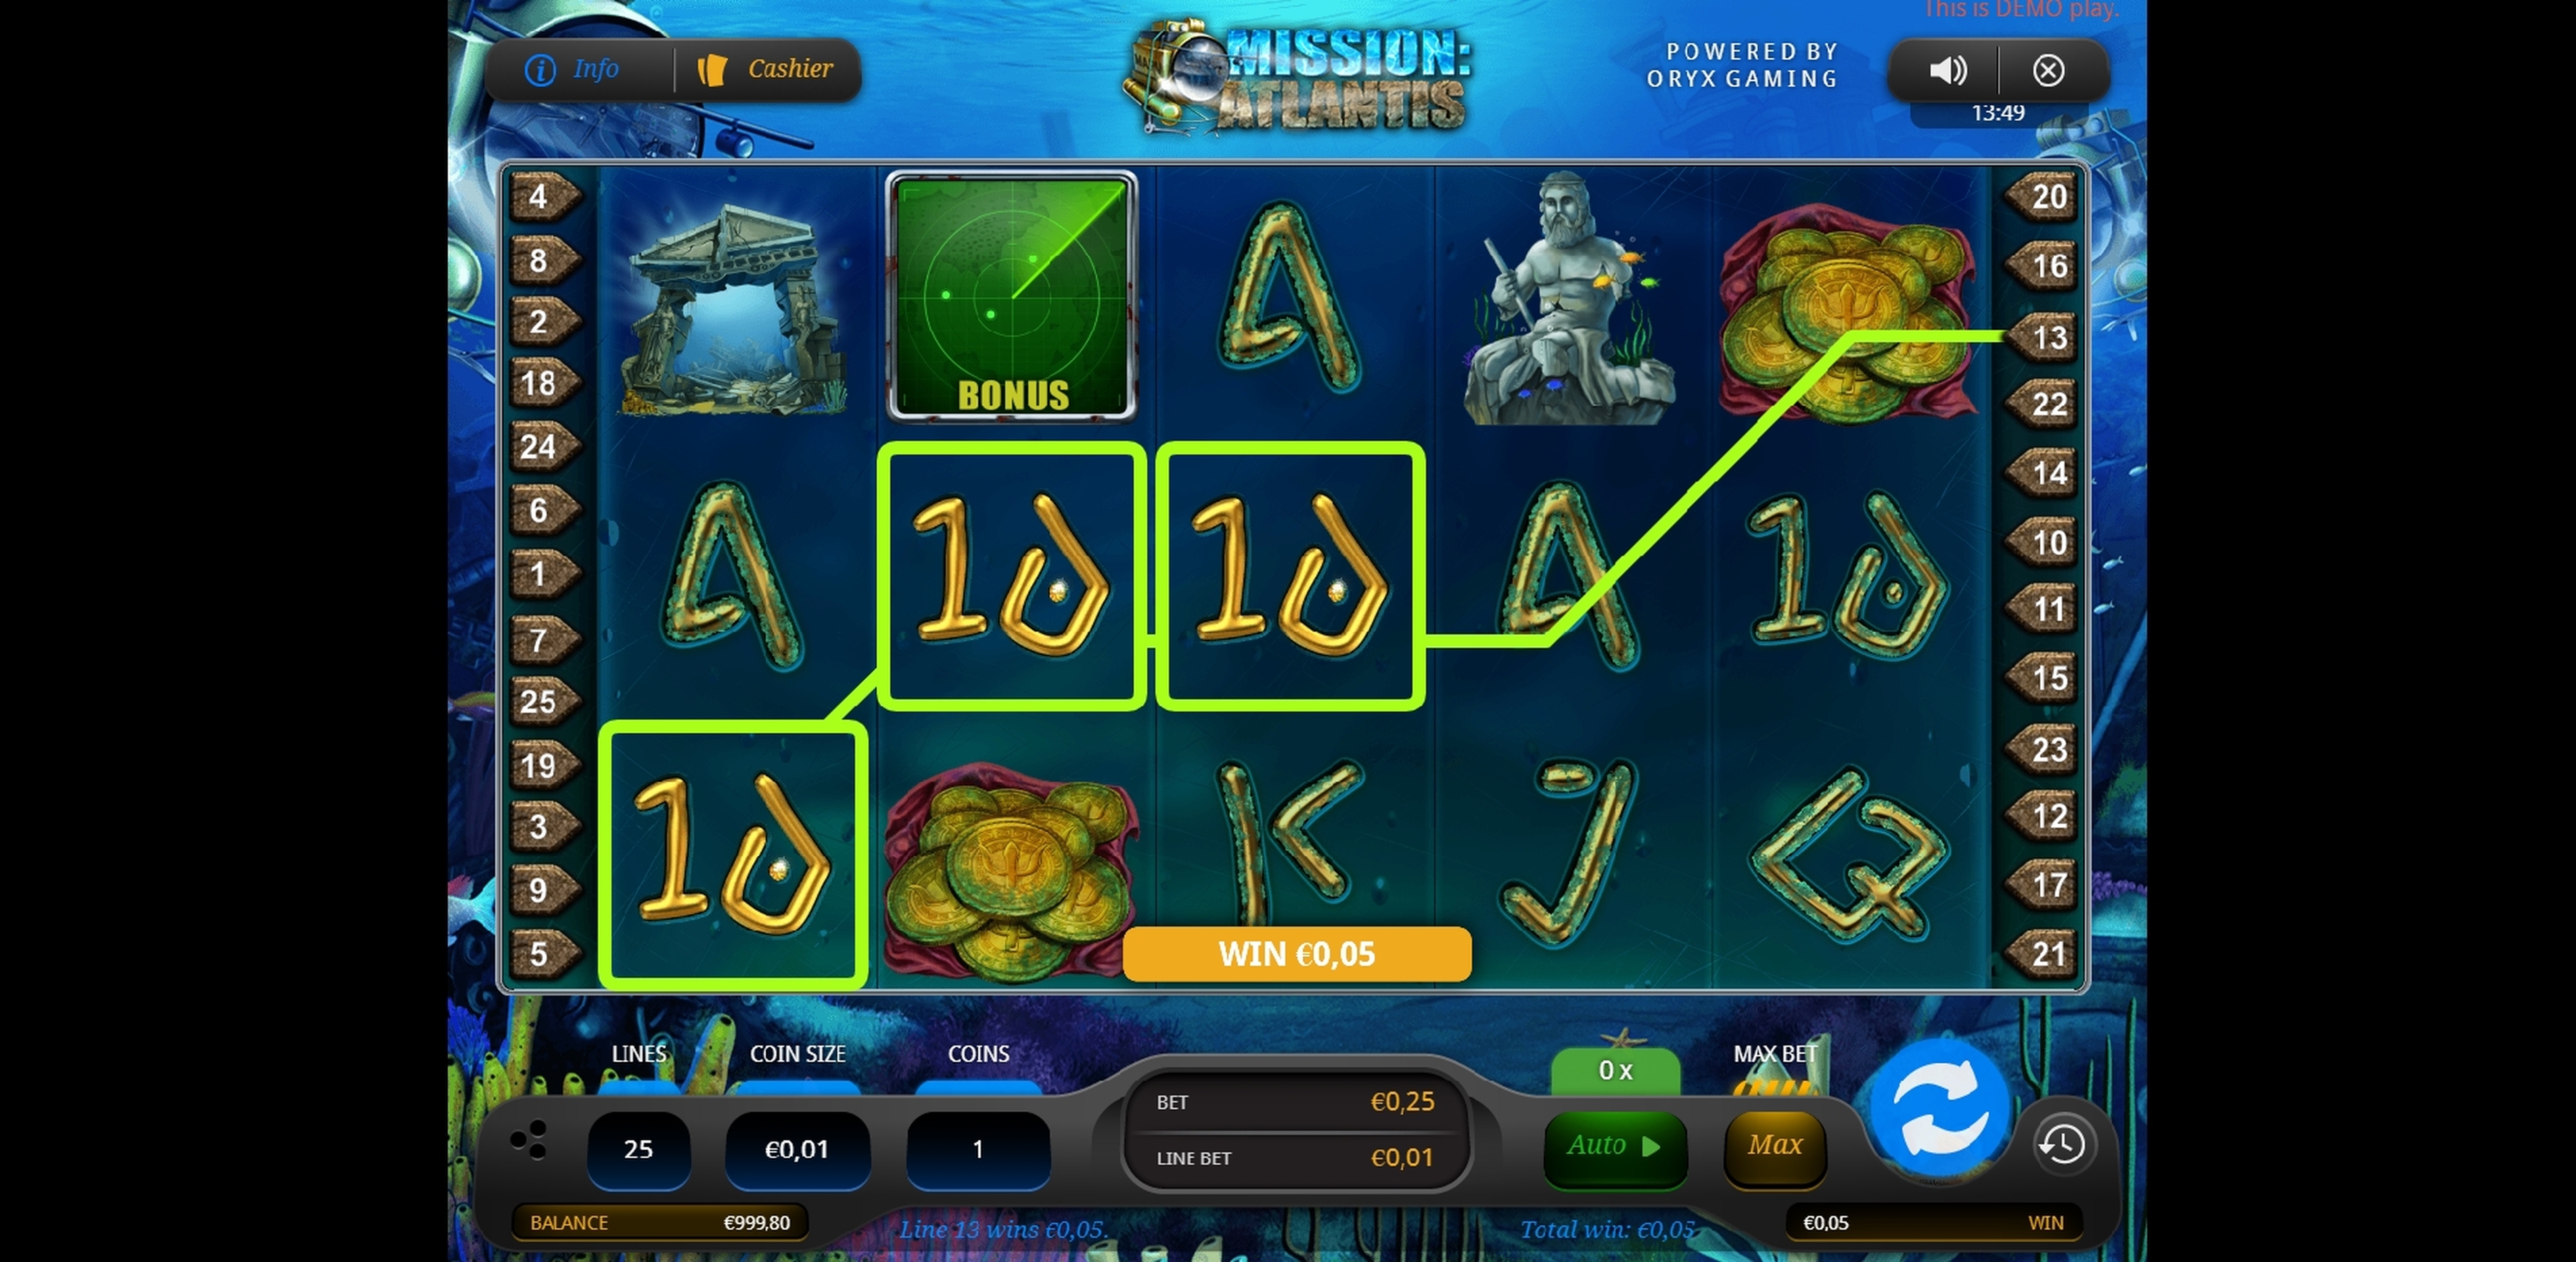 Win Money in Mission: Atlantis Free Slot Game by Oryx Gaming